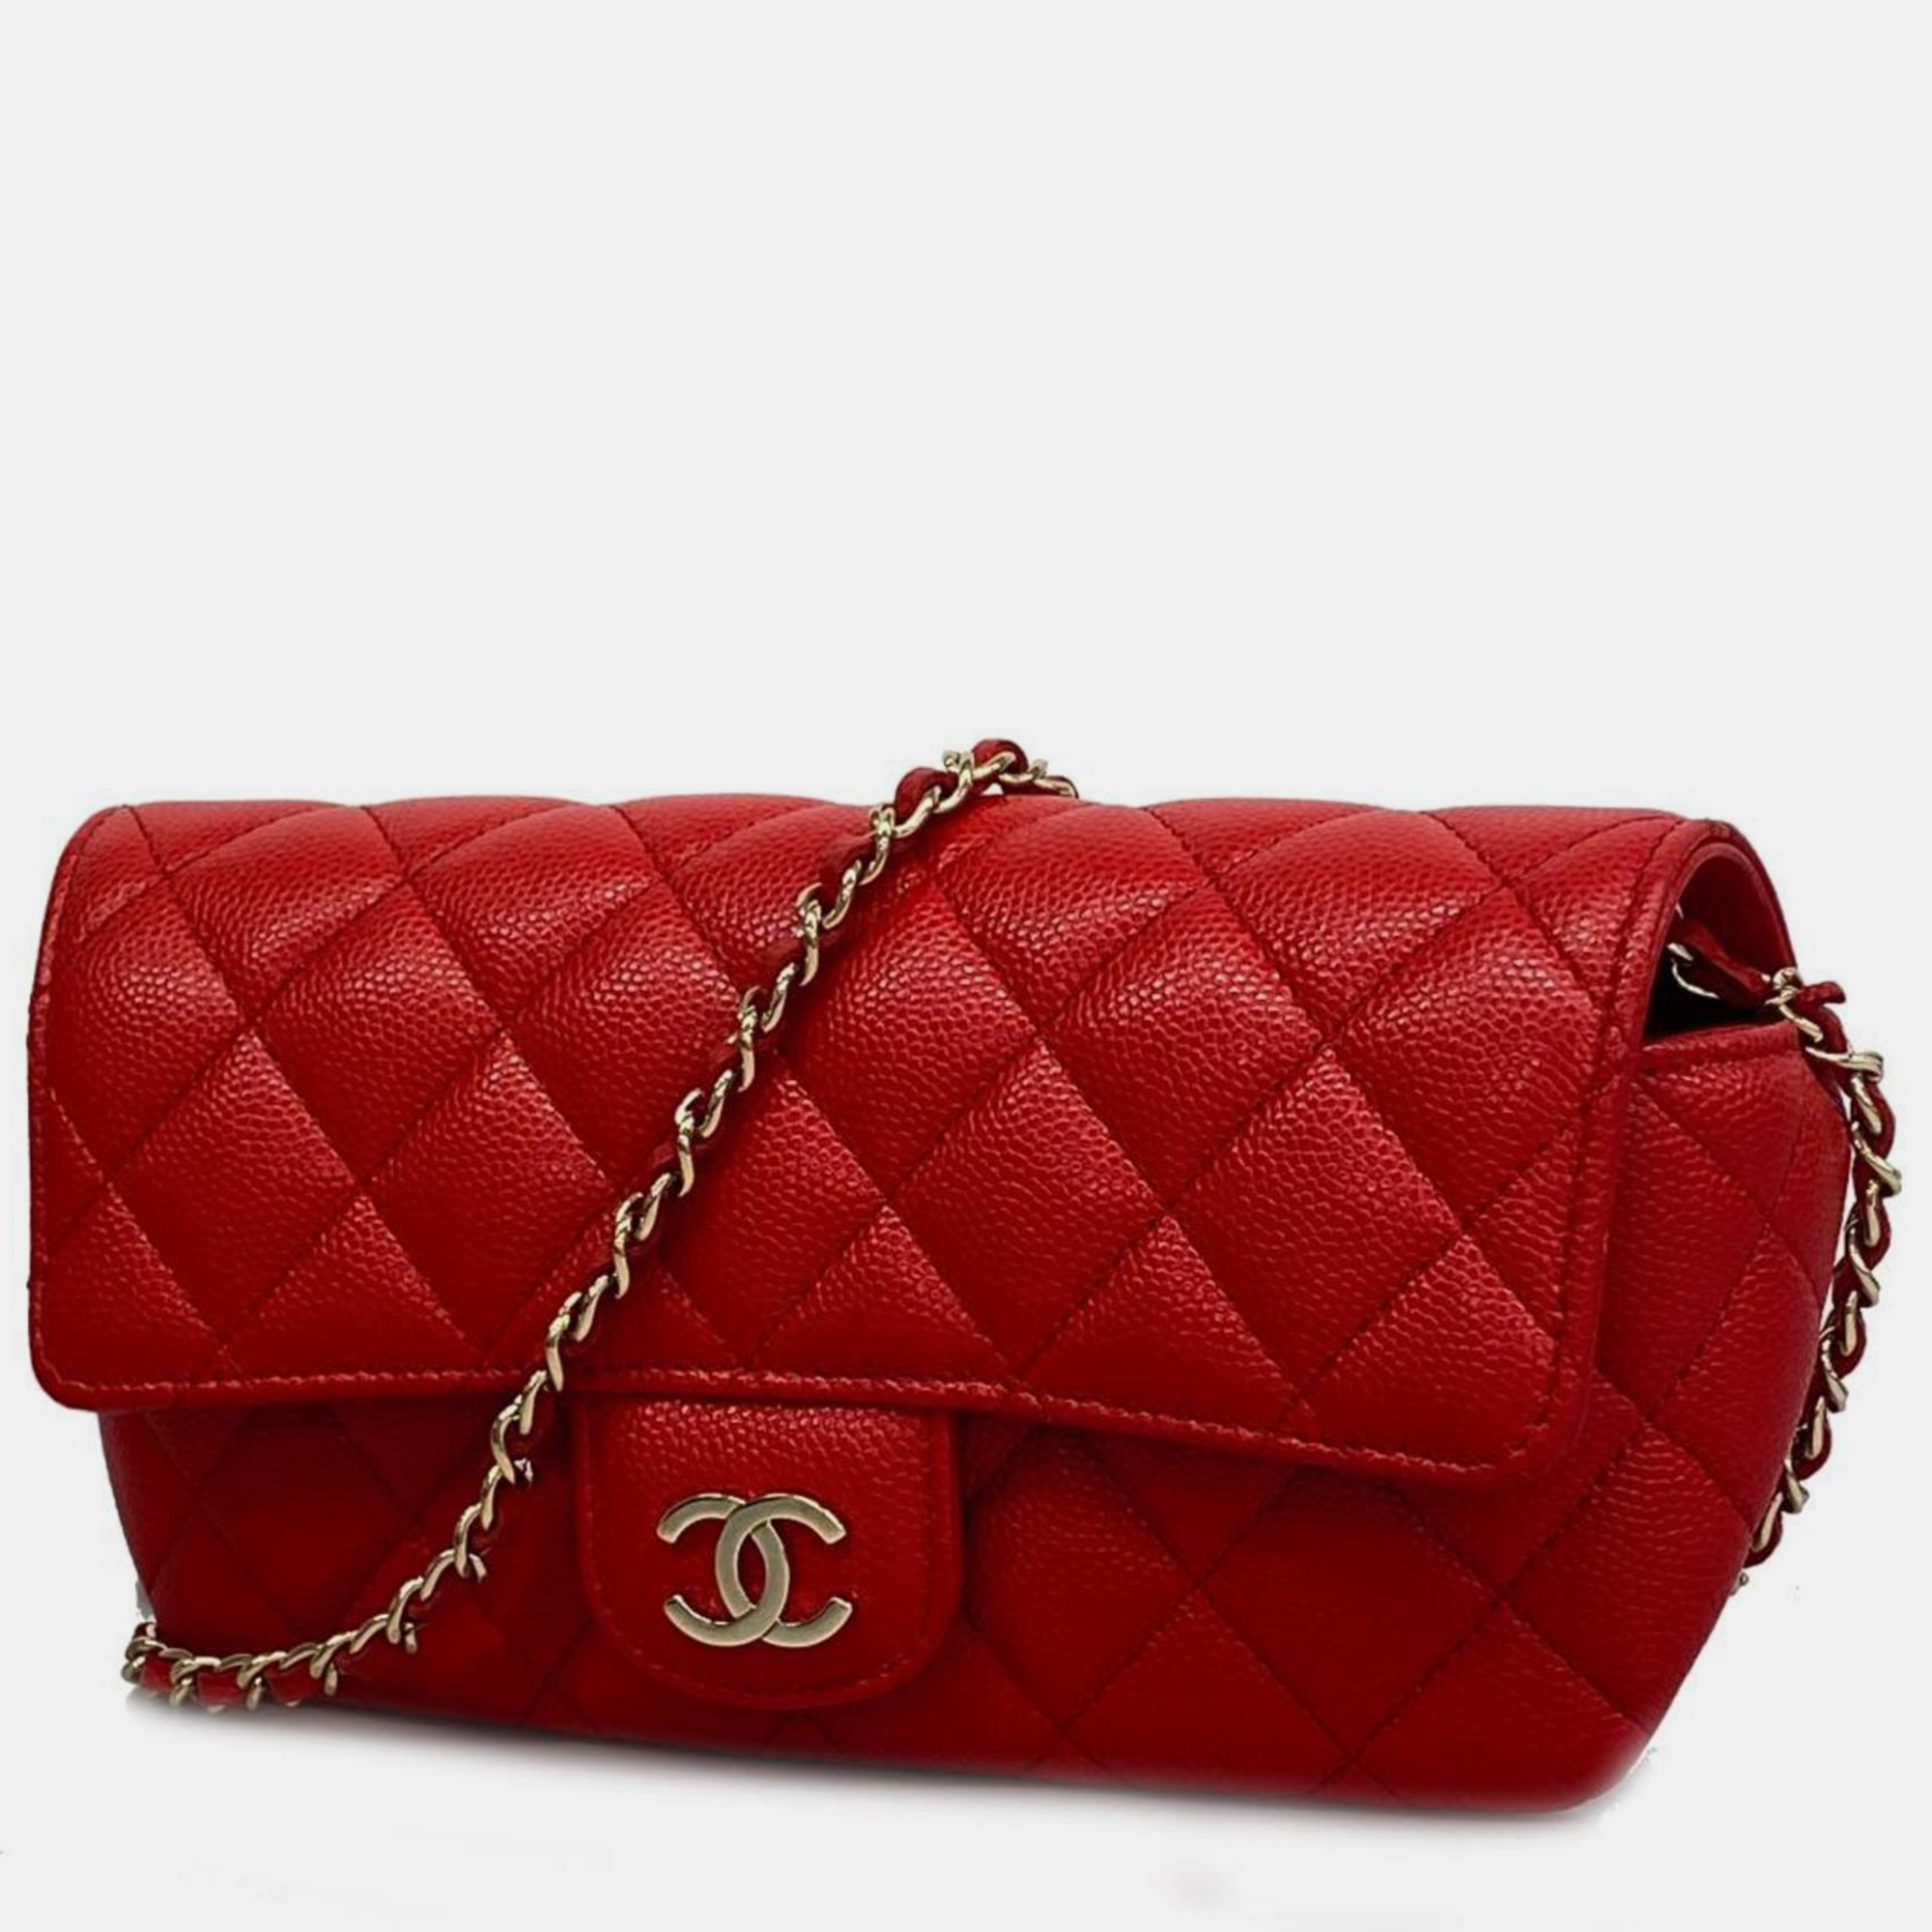 Chanel red caviar quilted glasses case with chain